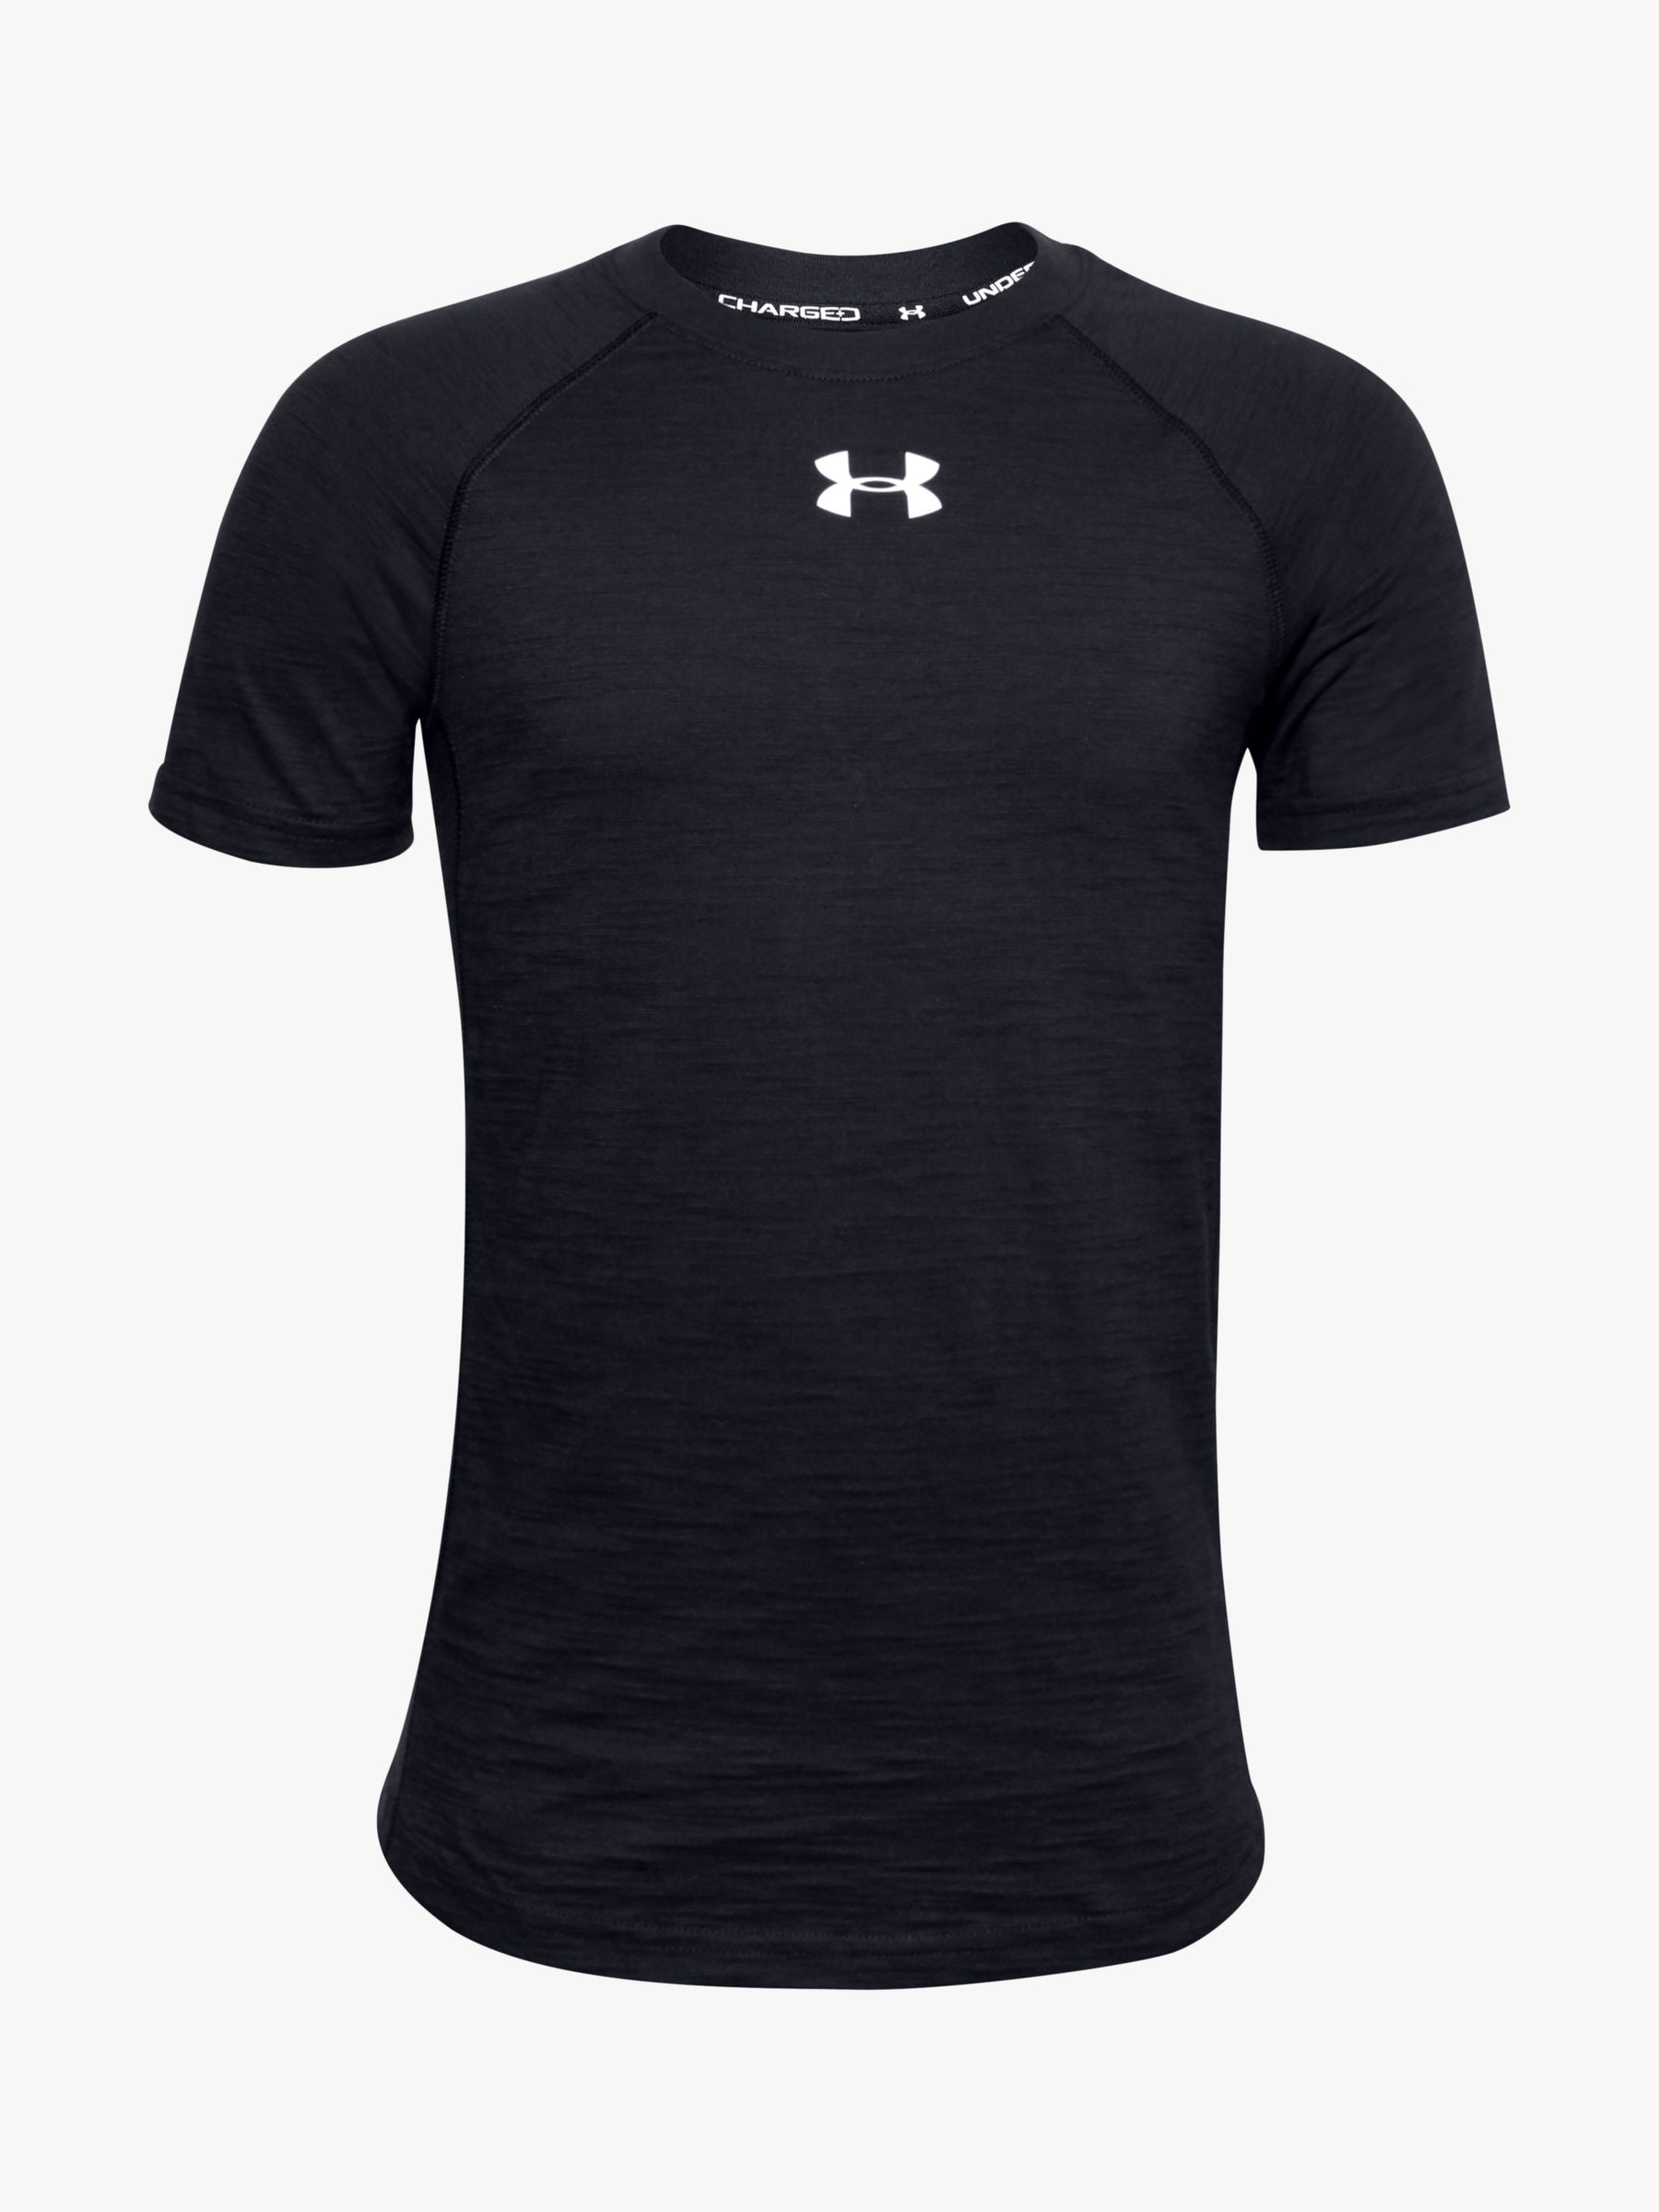 Image of Under Armour Boys Charged Cotton Short Sleeve Training Top Black